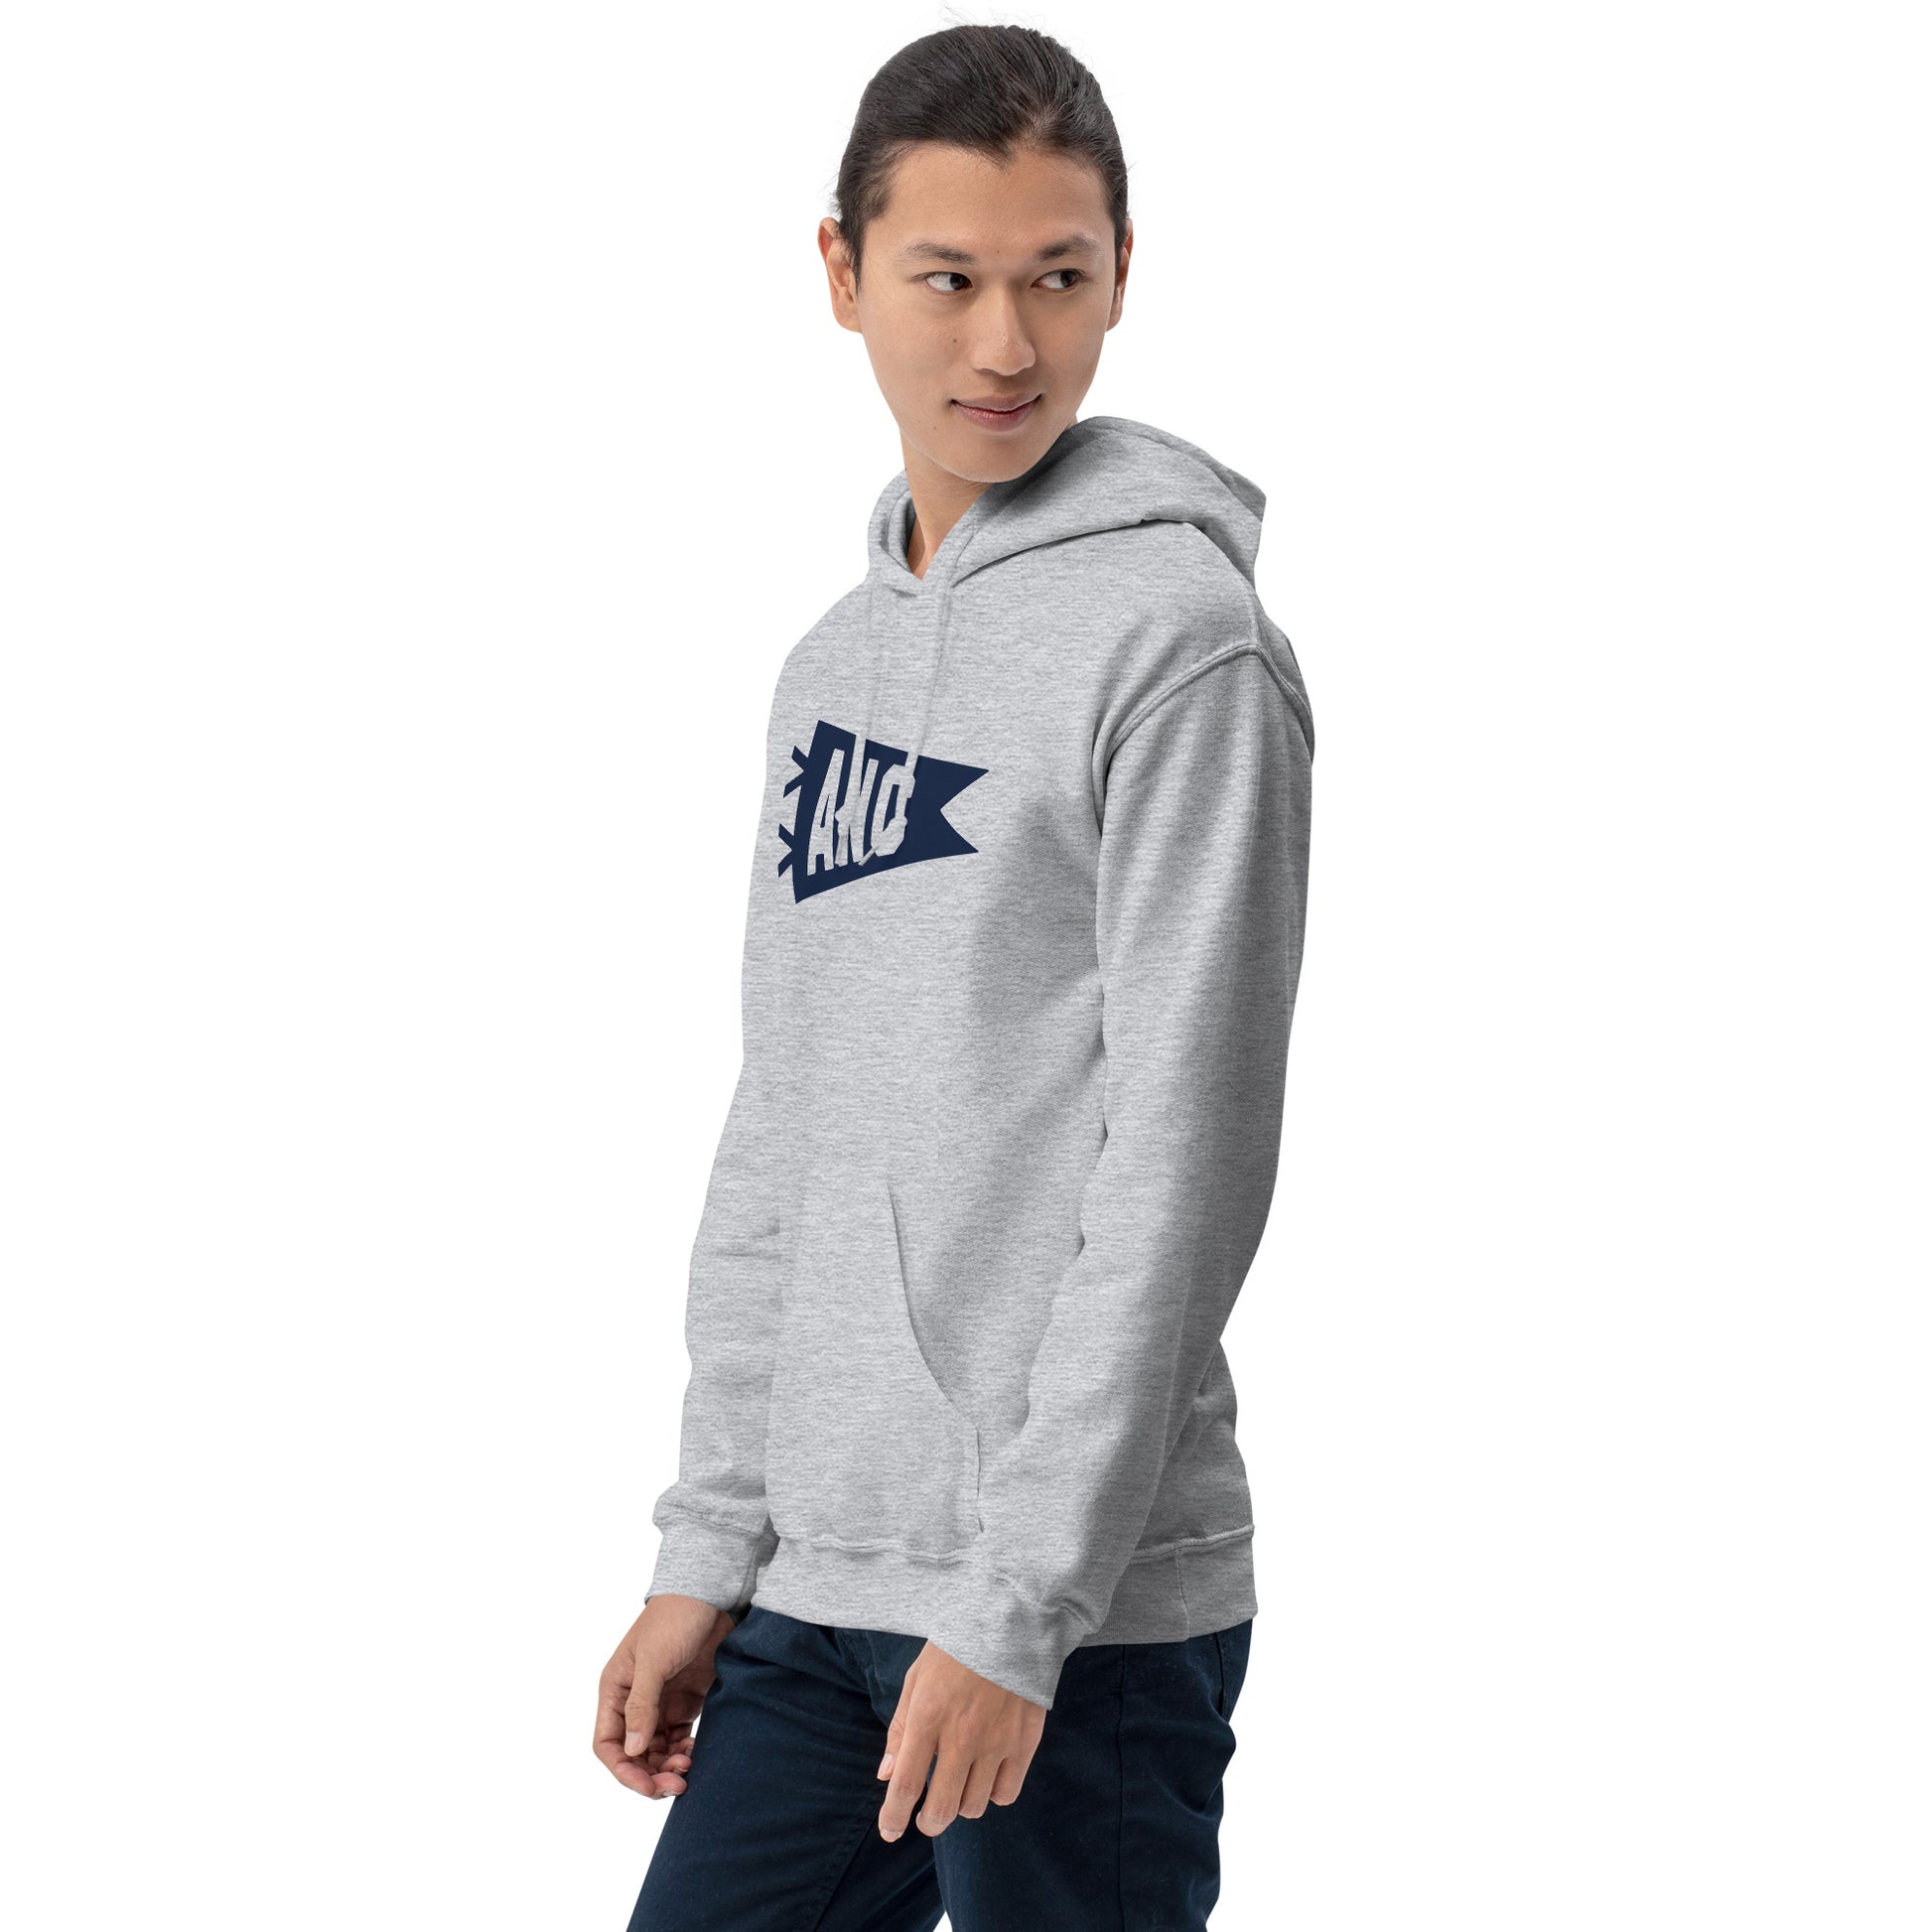 Airport Code Unisex Hoodie - Navy Blue Graphic • ANC Anchorage • YHM Designs - Image 10